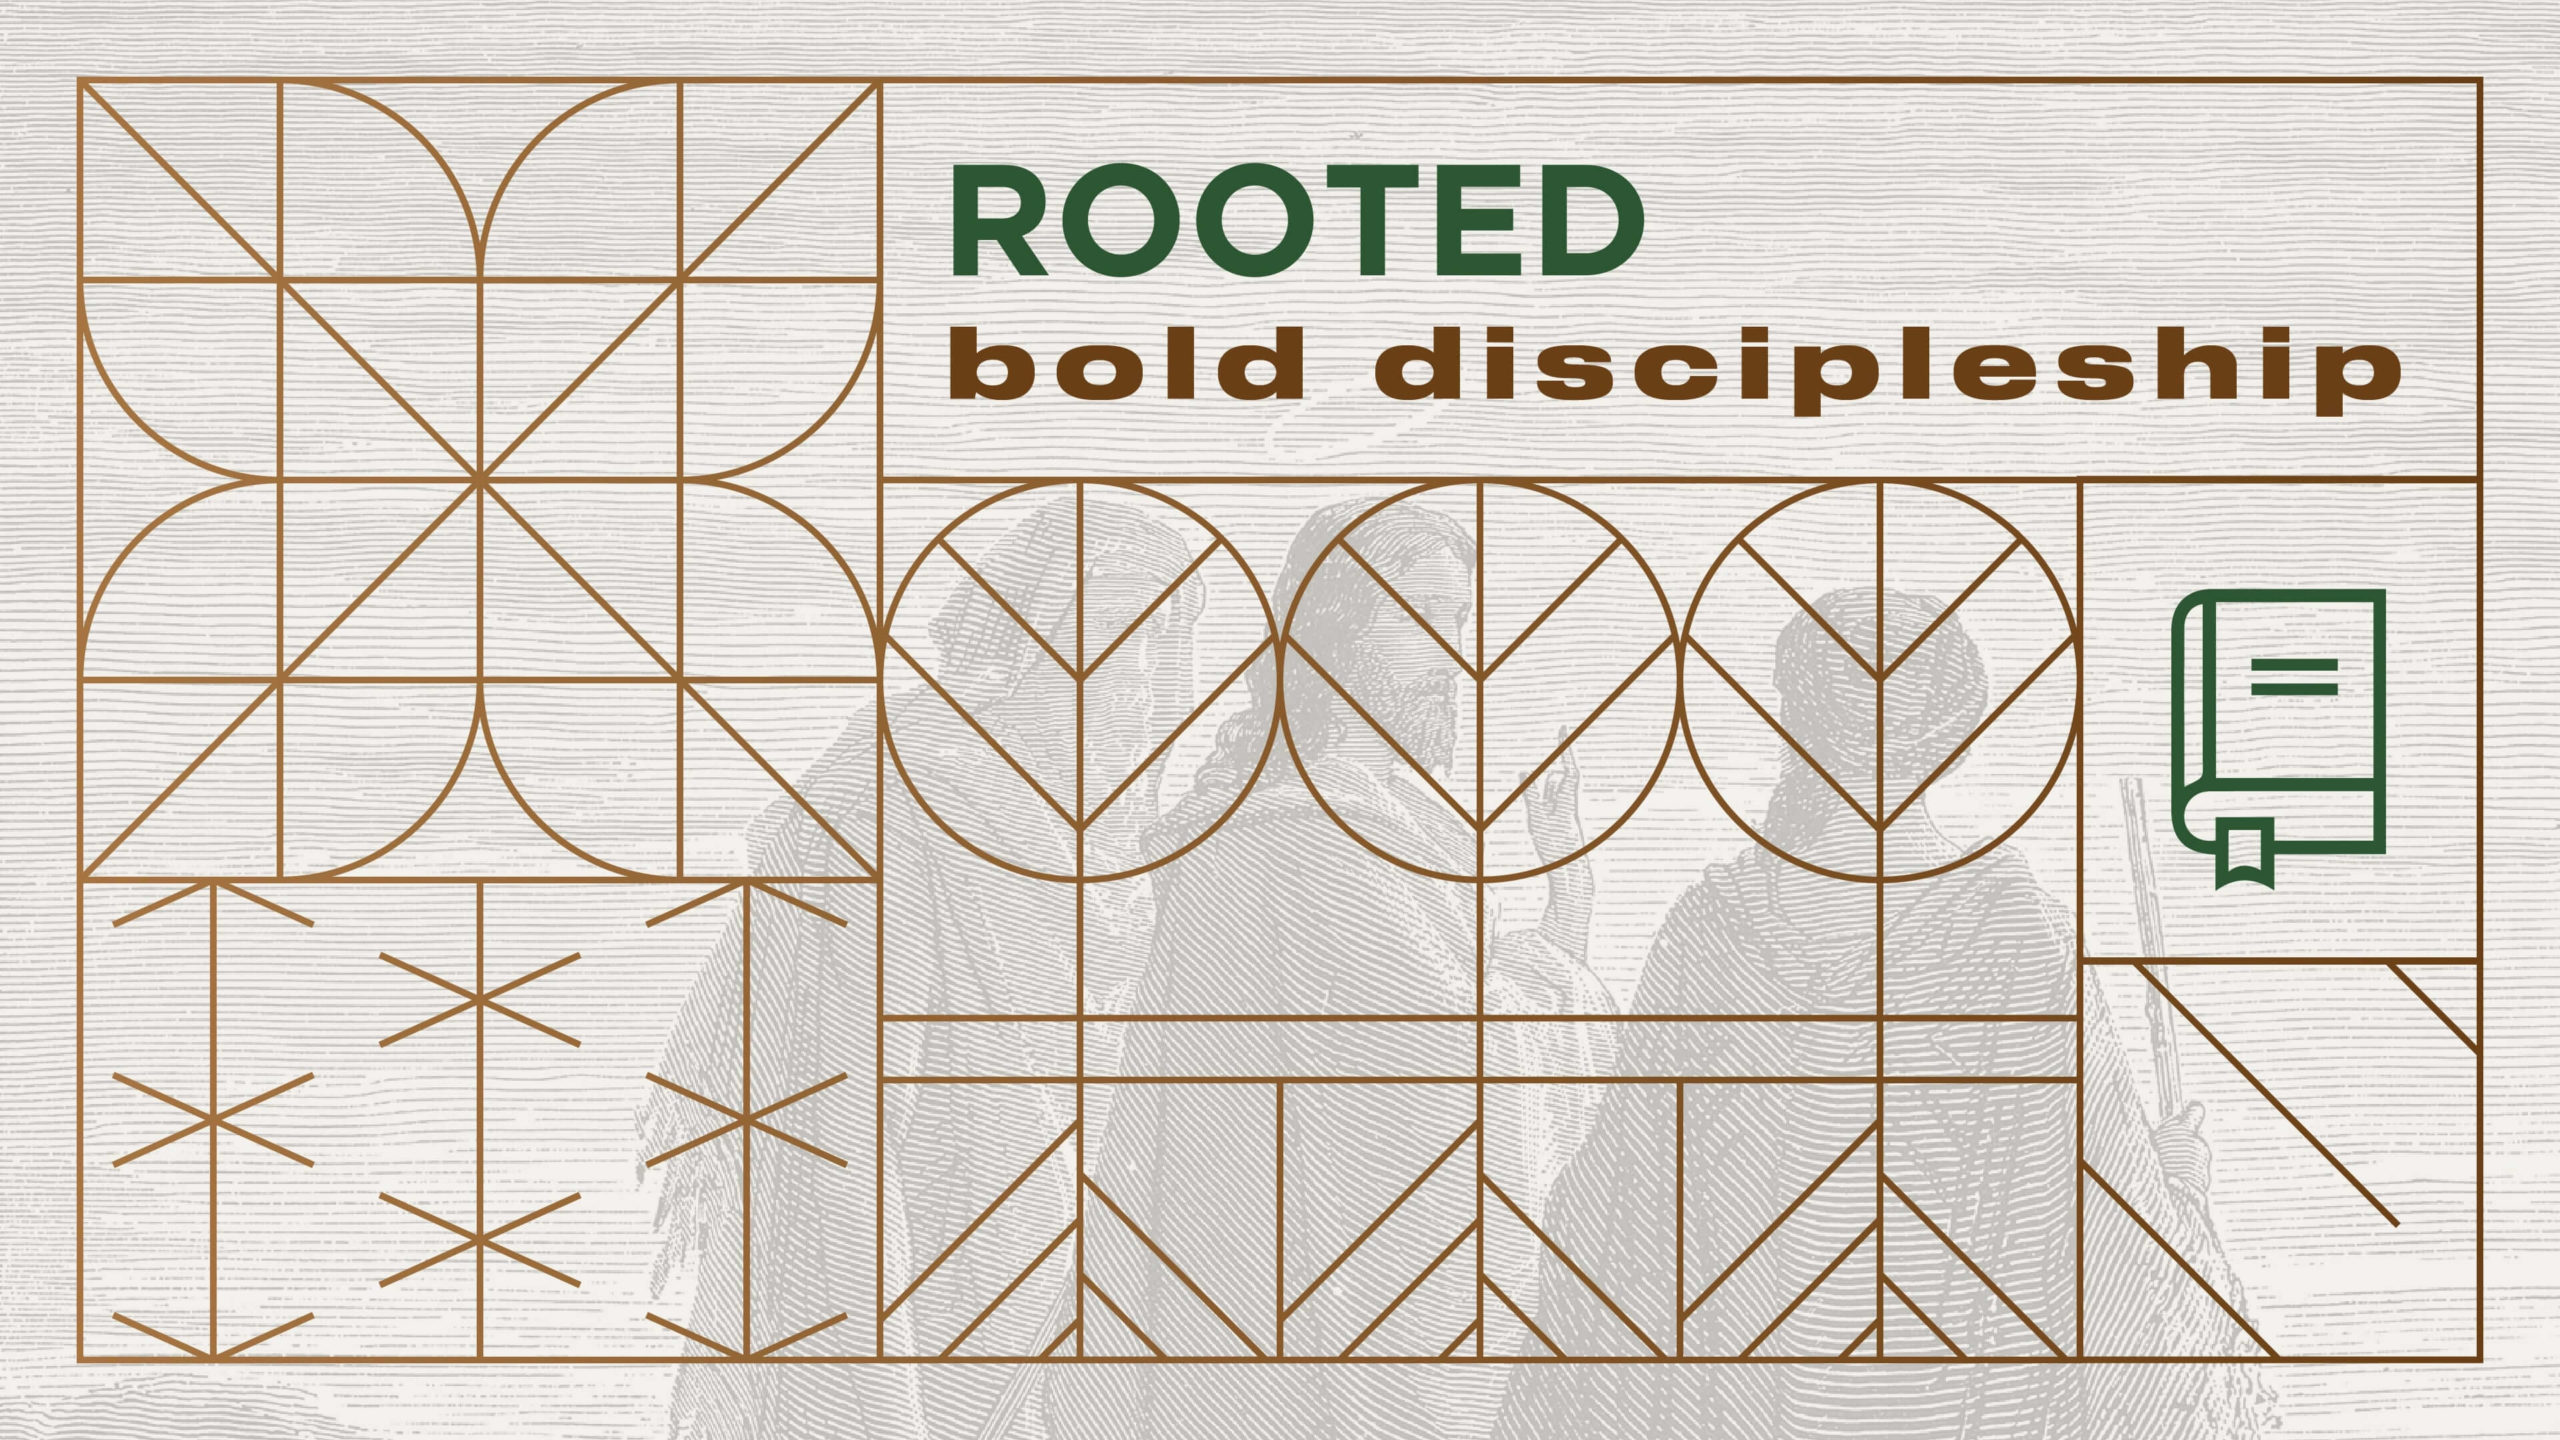 11:00- Rooted – Go Boldly : What is a disciple